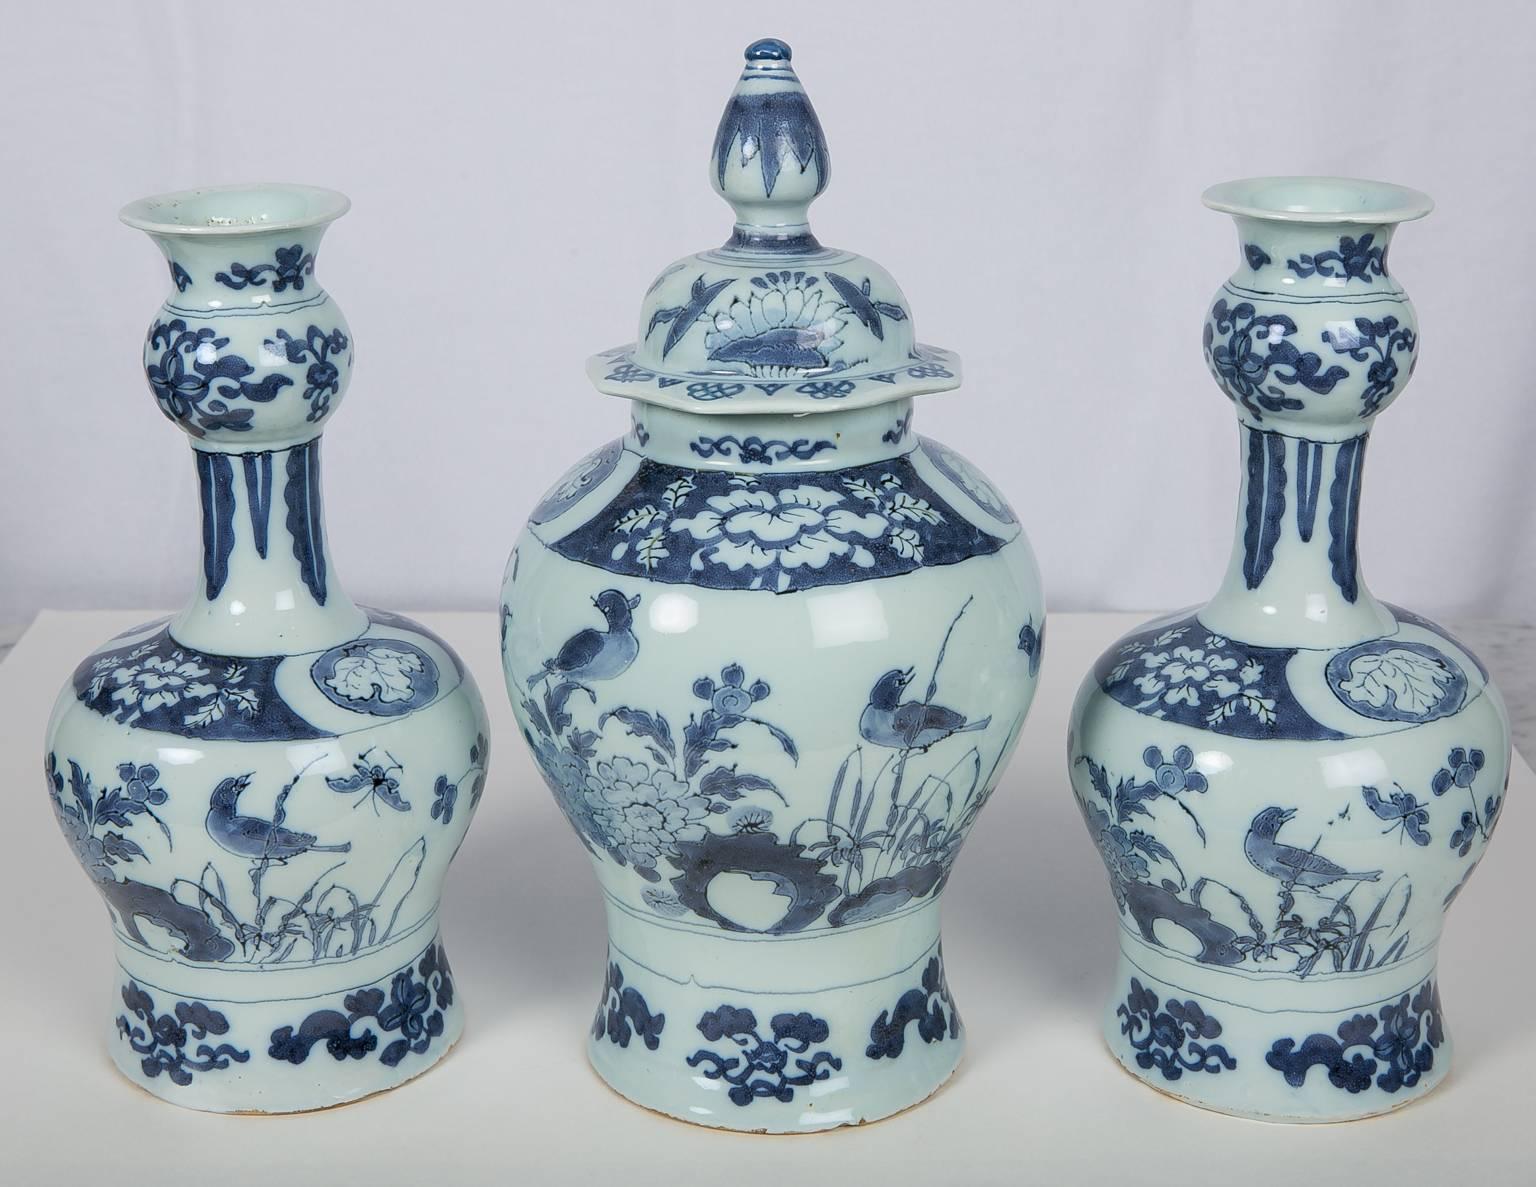 An antique Dutch Delft garniture of three vases: one covered and two gourd shaped.
The soft palette of the songbirds and their surroundings set against the palest blue ground makes this garniture particularly beautiful. The songbirds are perched